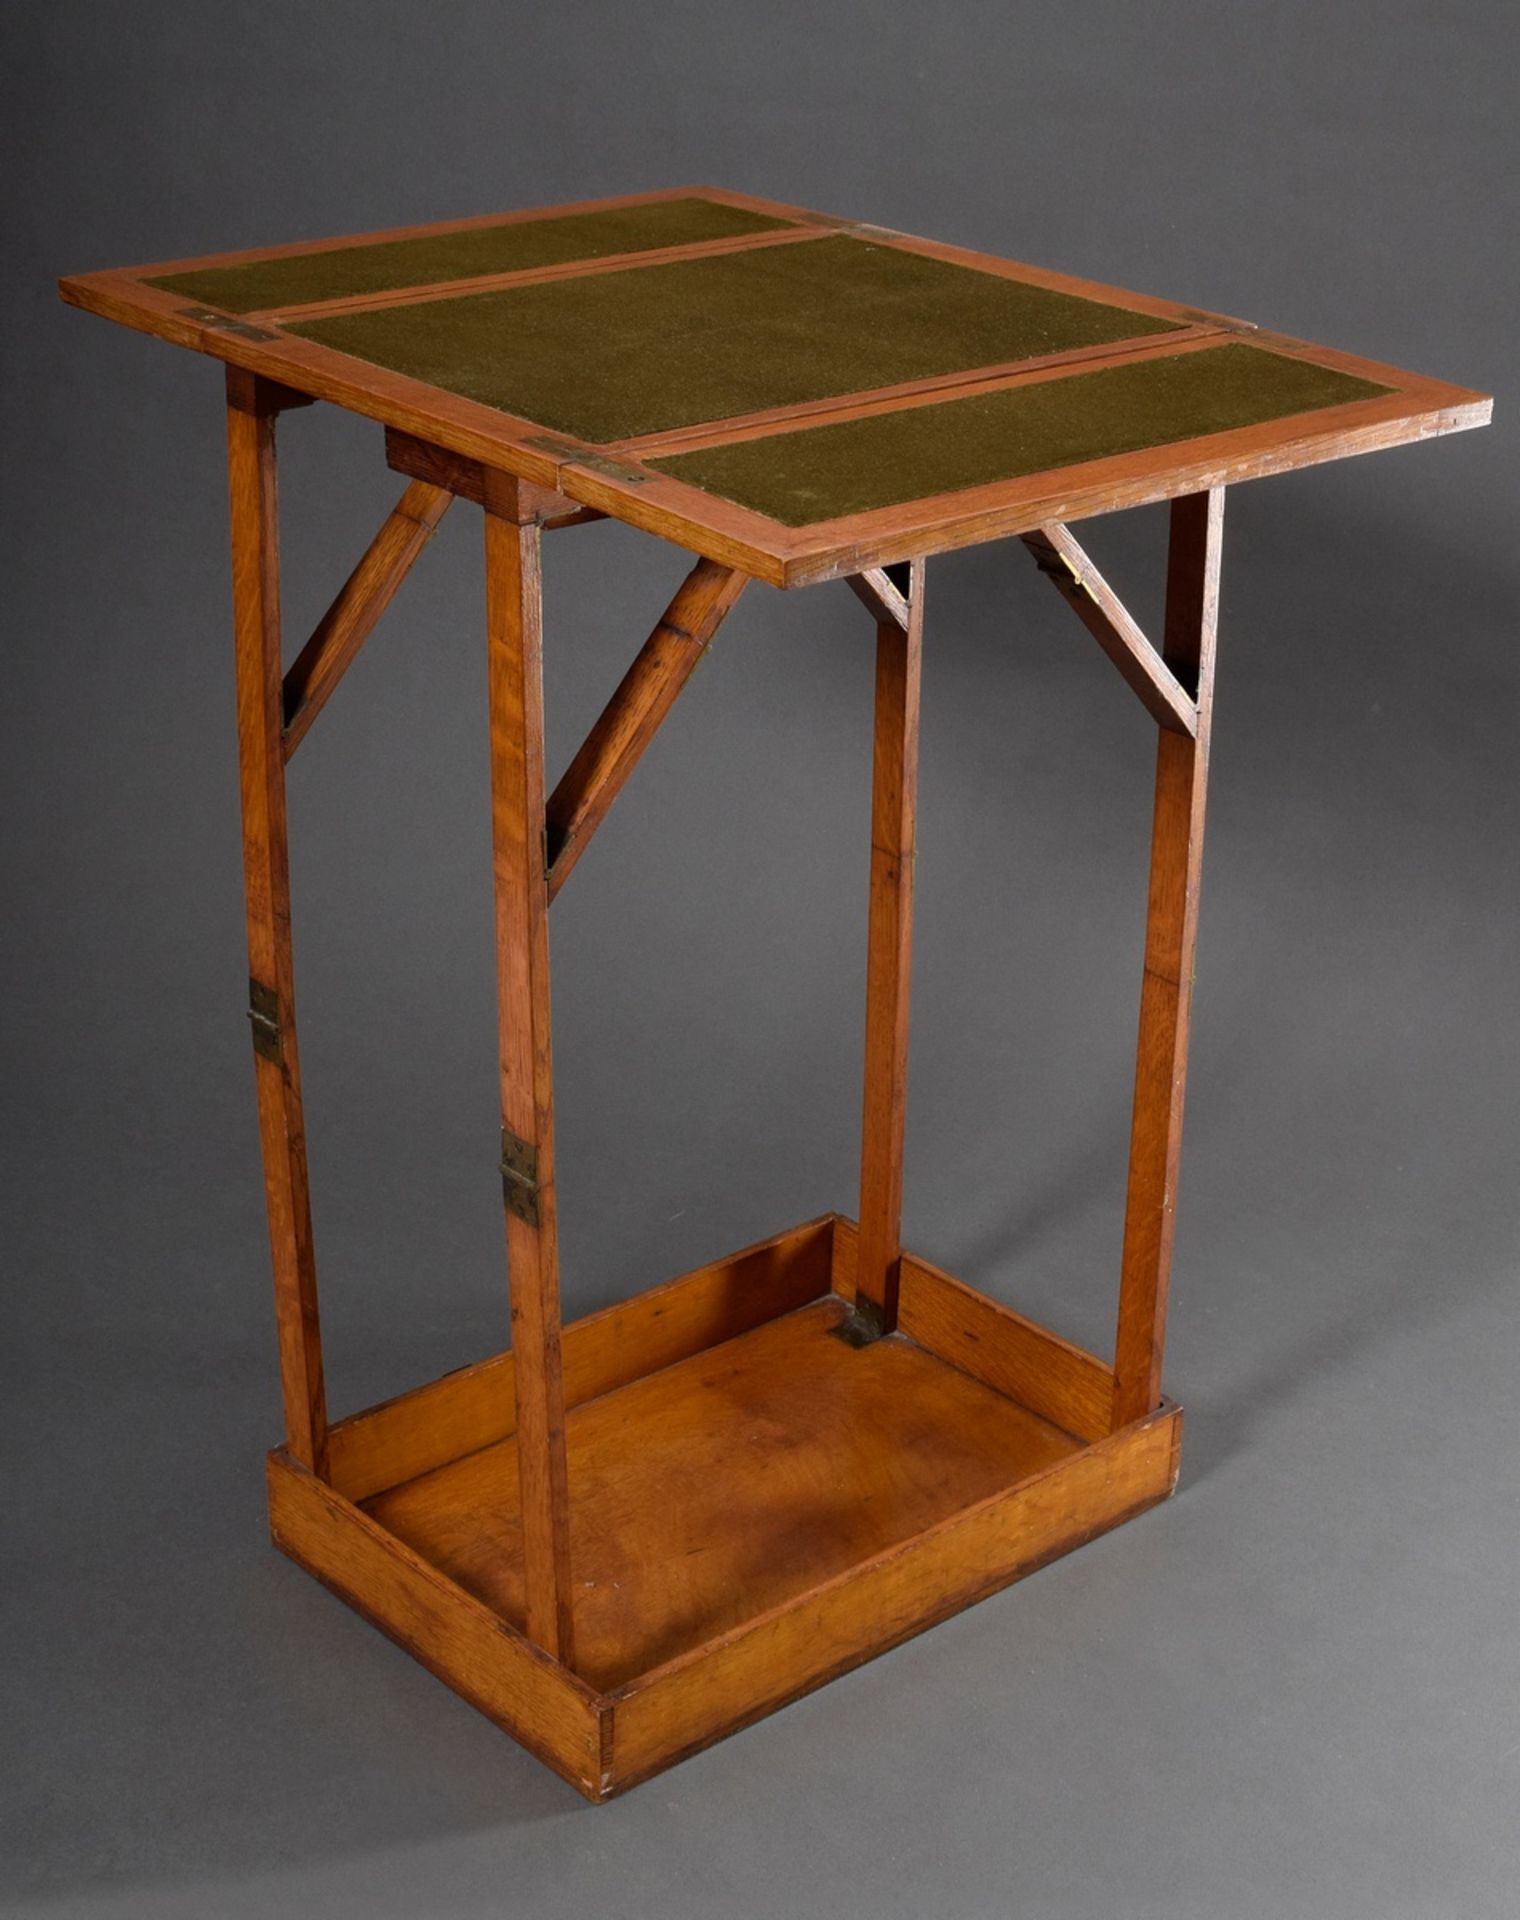 Travel patent table with green felt tops and two drawers, wood, foldable, num. "Patent Nr. 14097", 